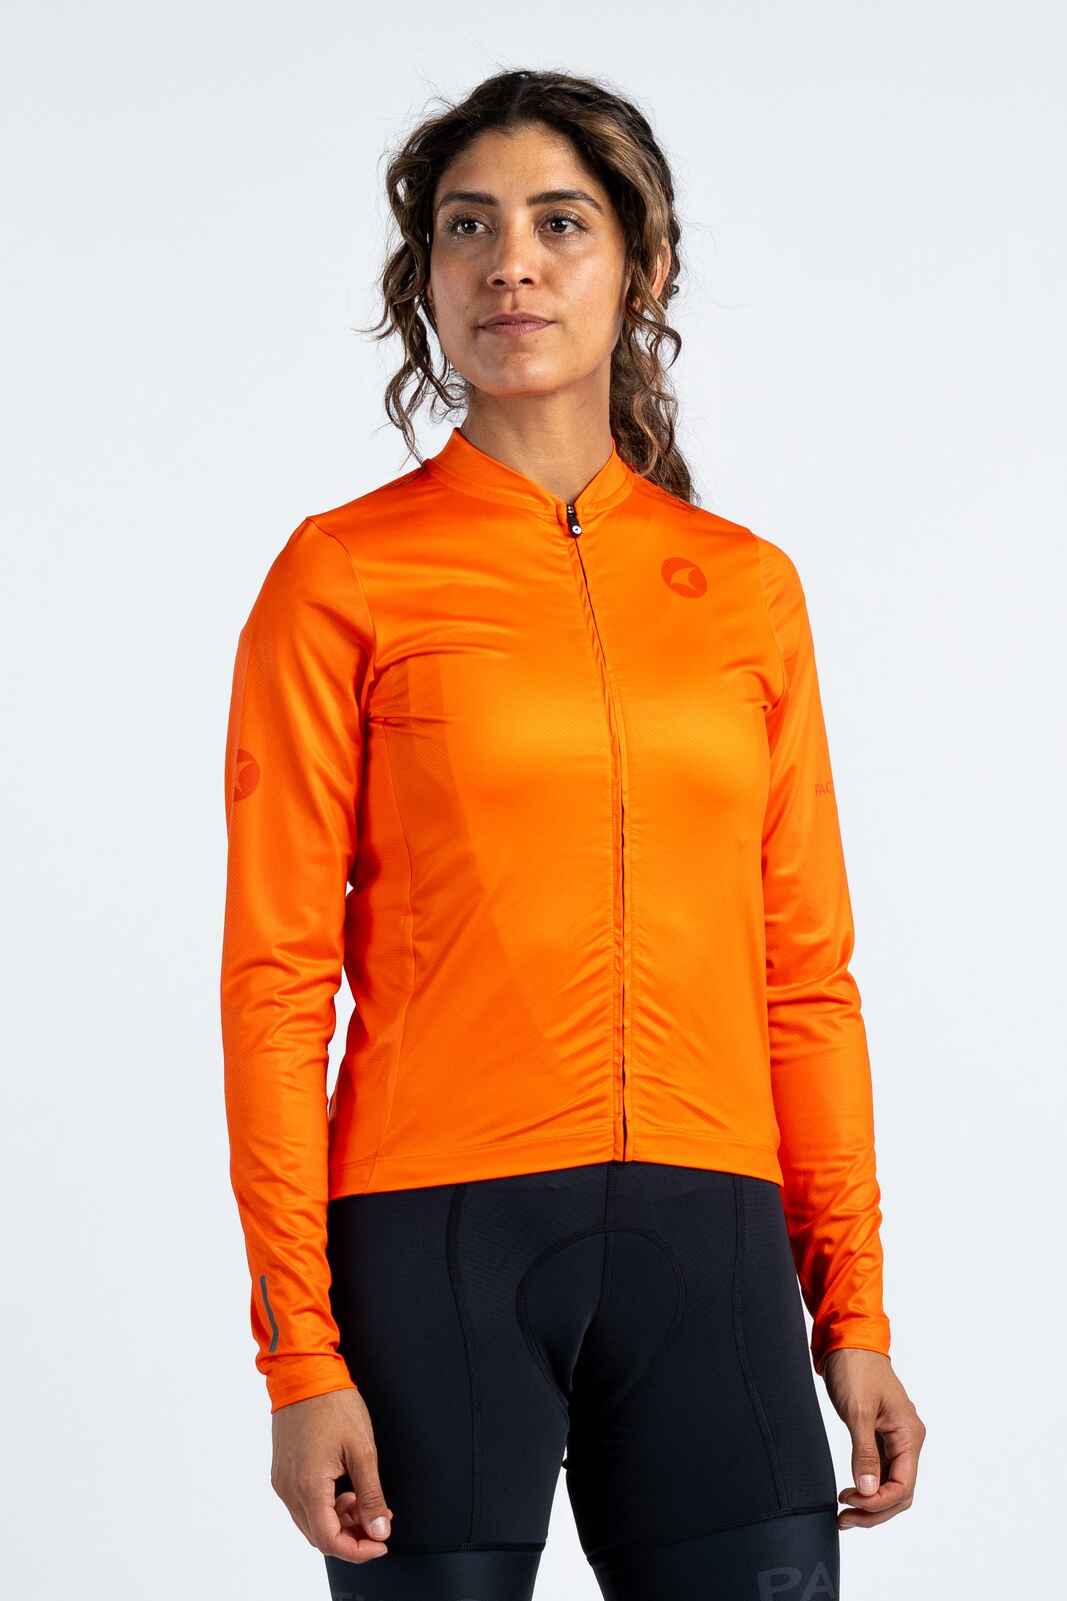 Women's Red/Orange Long Sleeve Cycling Jersey - Ascent Front View